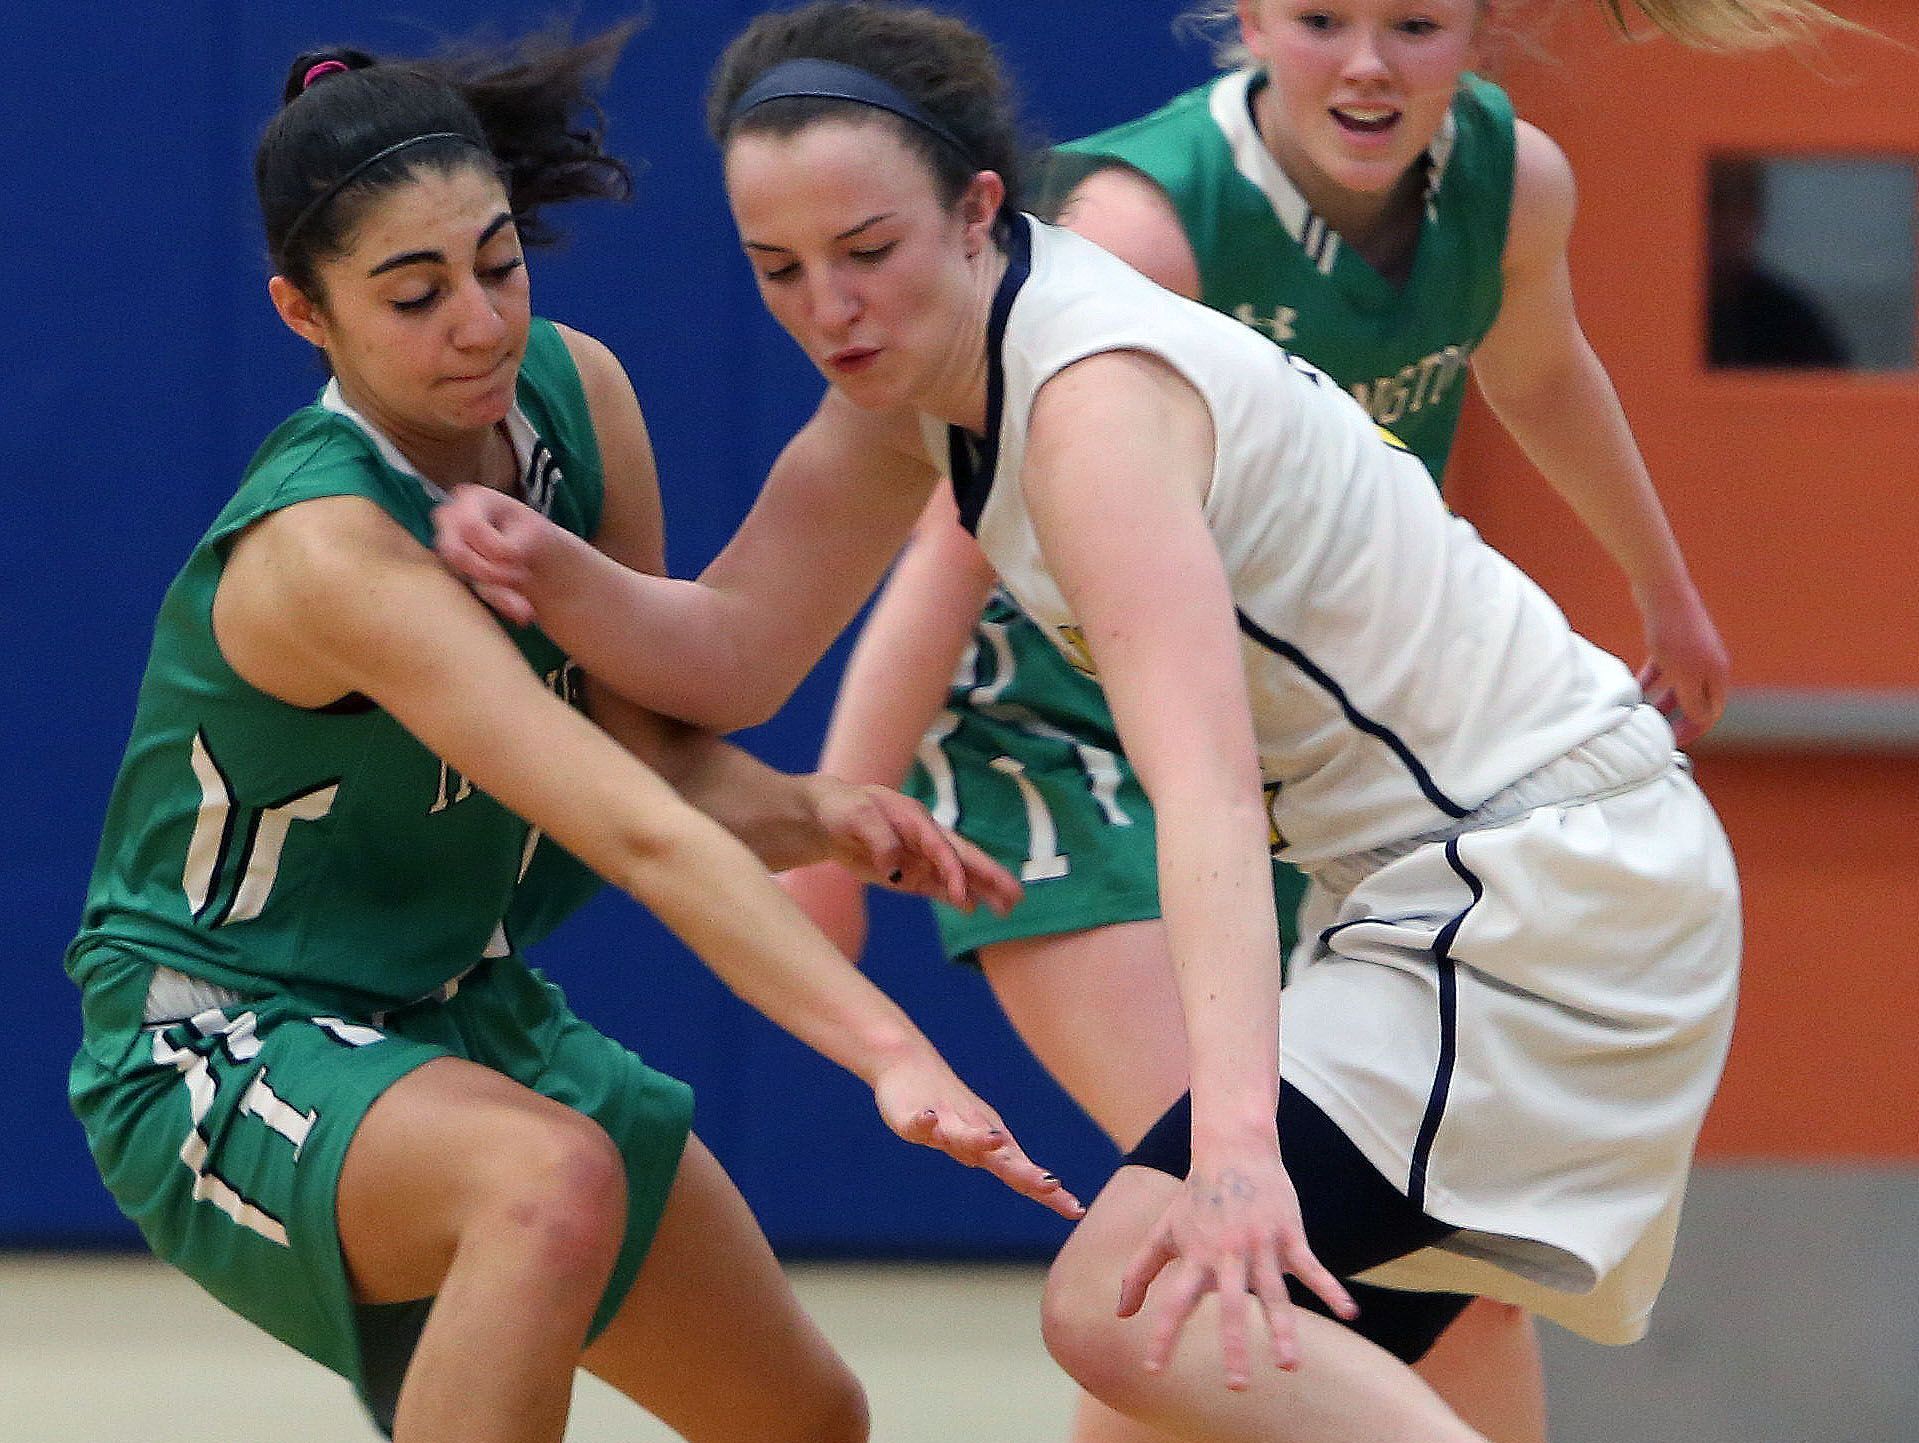 From left, Irvington's Olivia Valdes and Highland's Bri Rozzi battle for a loose ball on Tuesday at SUNY New Paltz.